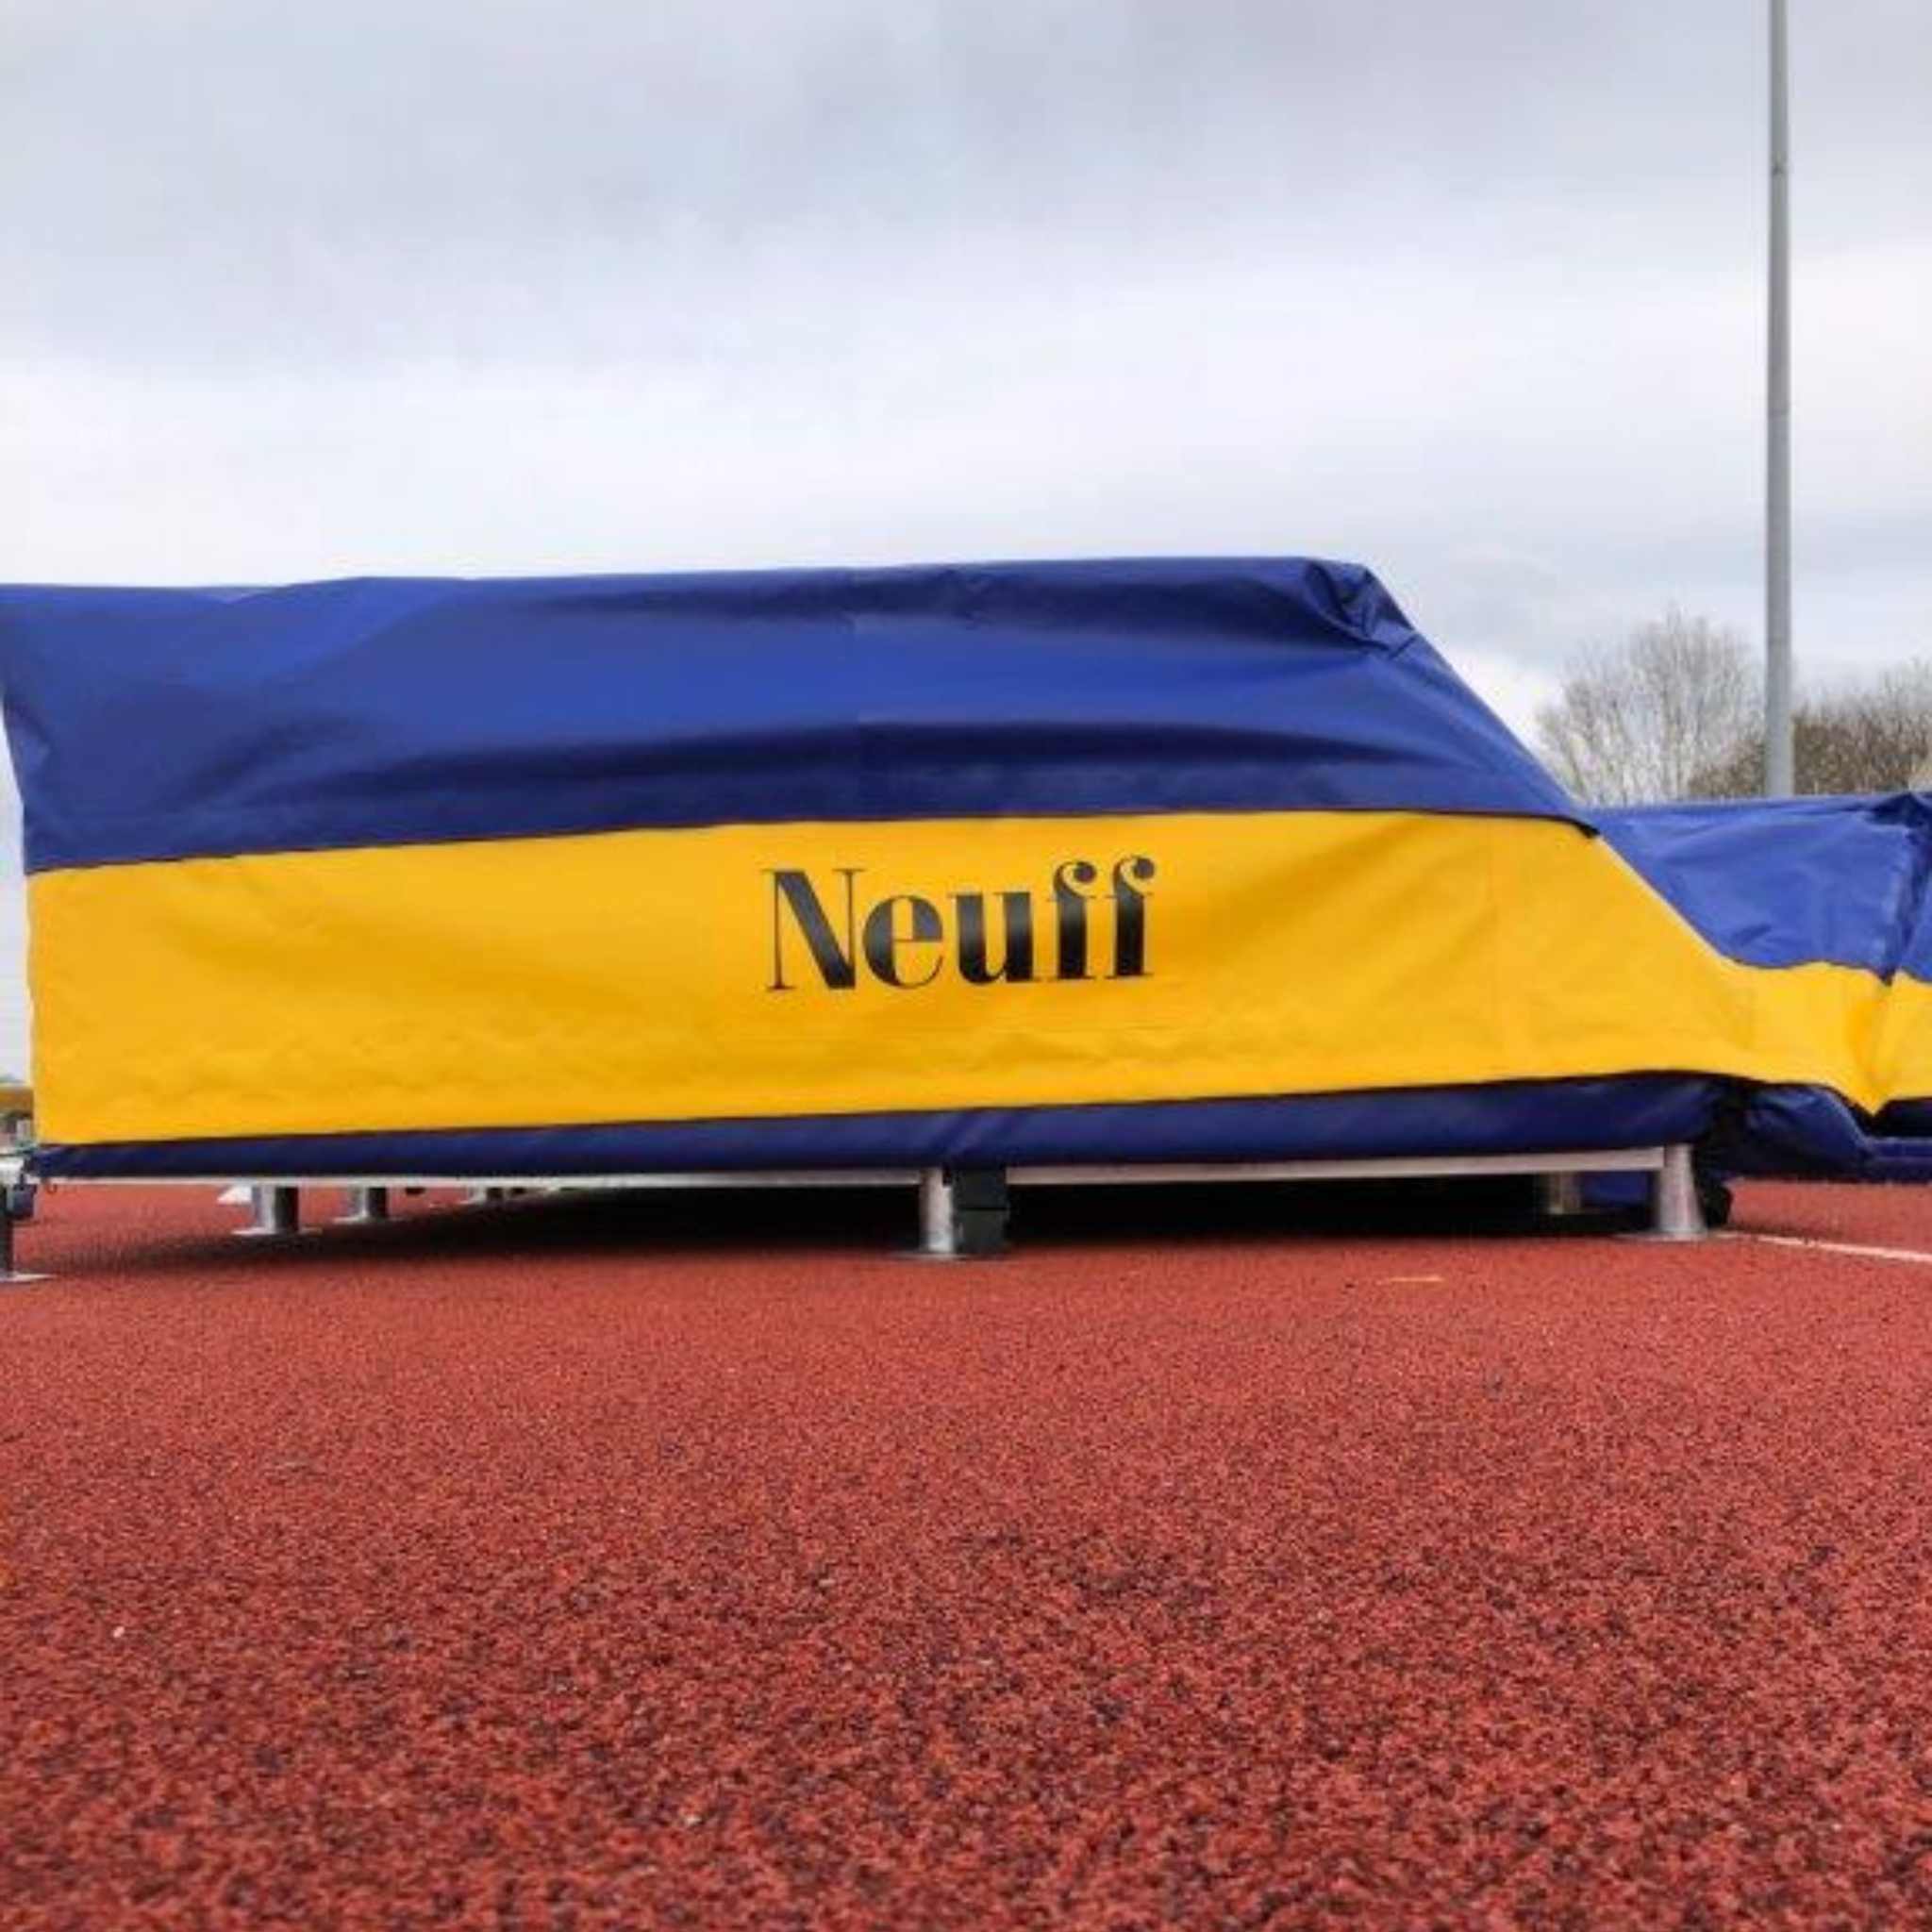 Rain Cover for landing beds | Pole Vault or High Jump